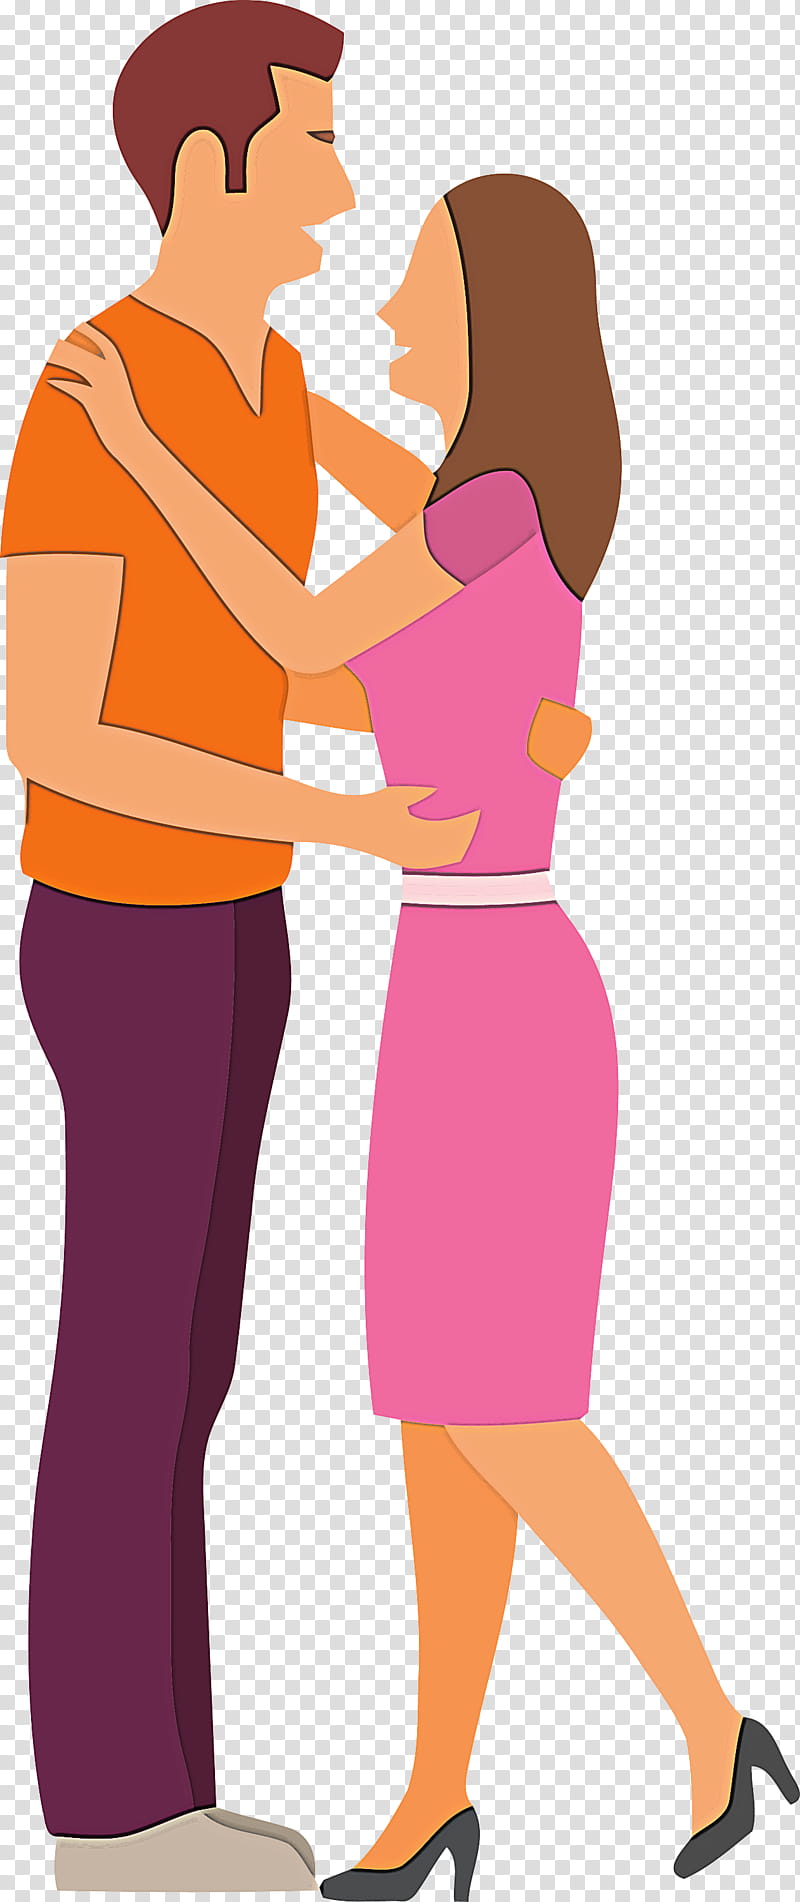 couple lover, Interaction, Cartoon, Gesture, Conversation, Style transparent background PNG clipart